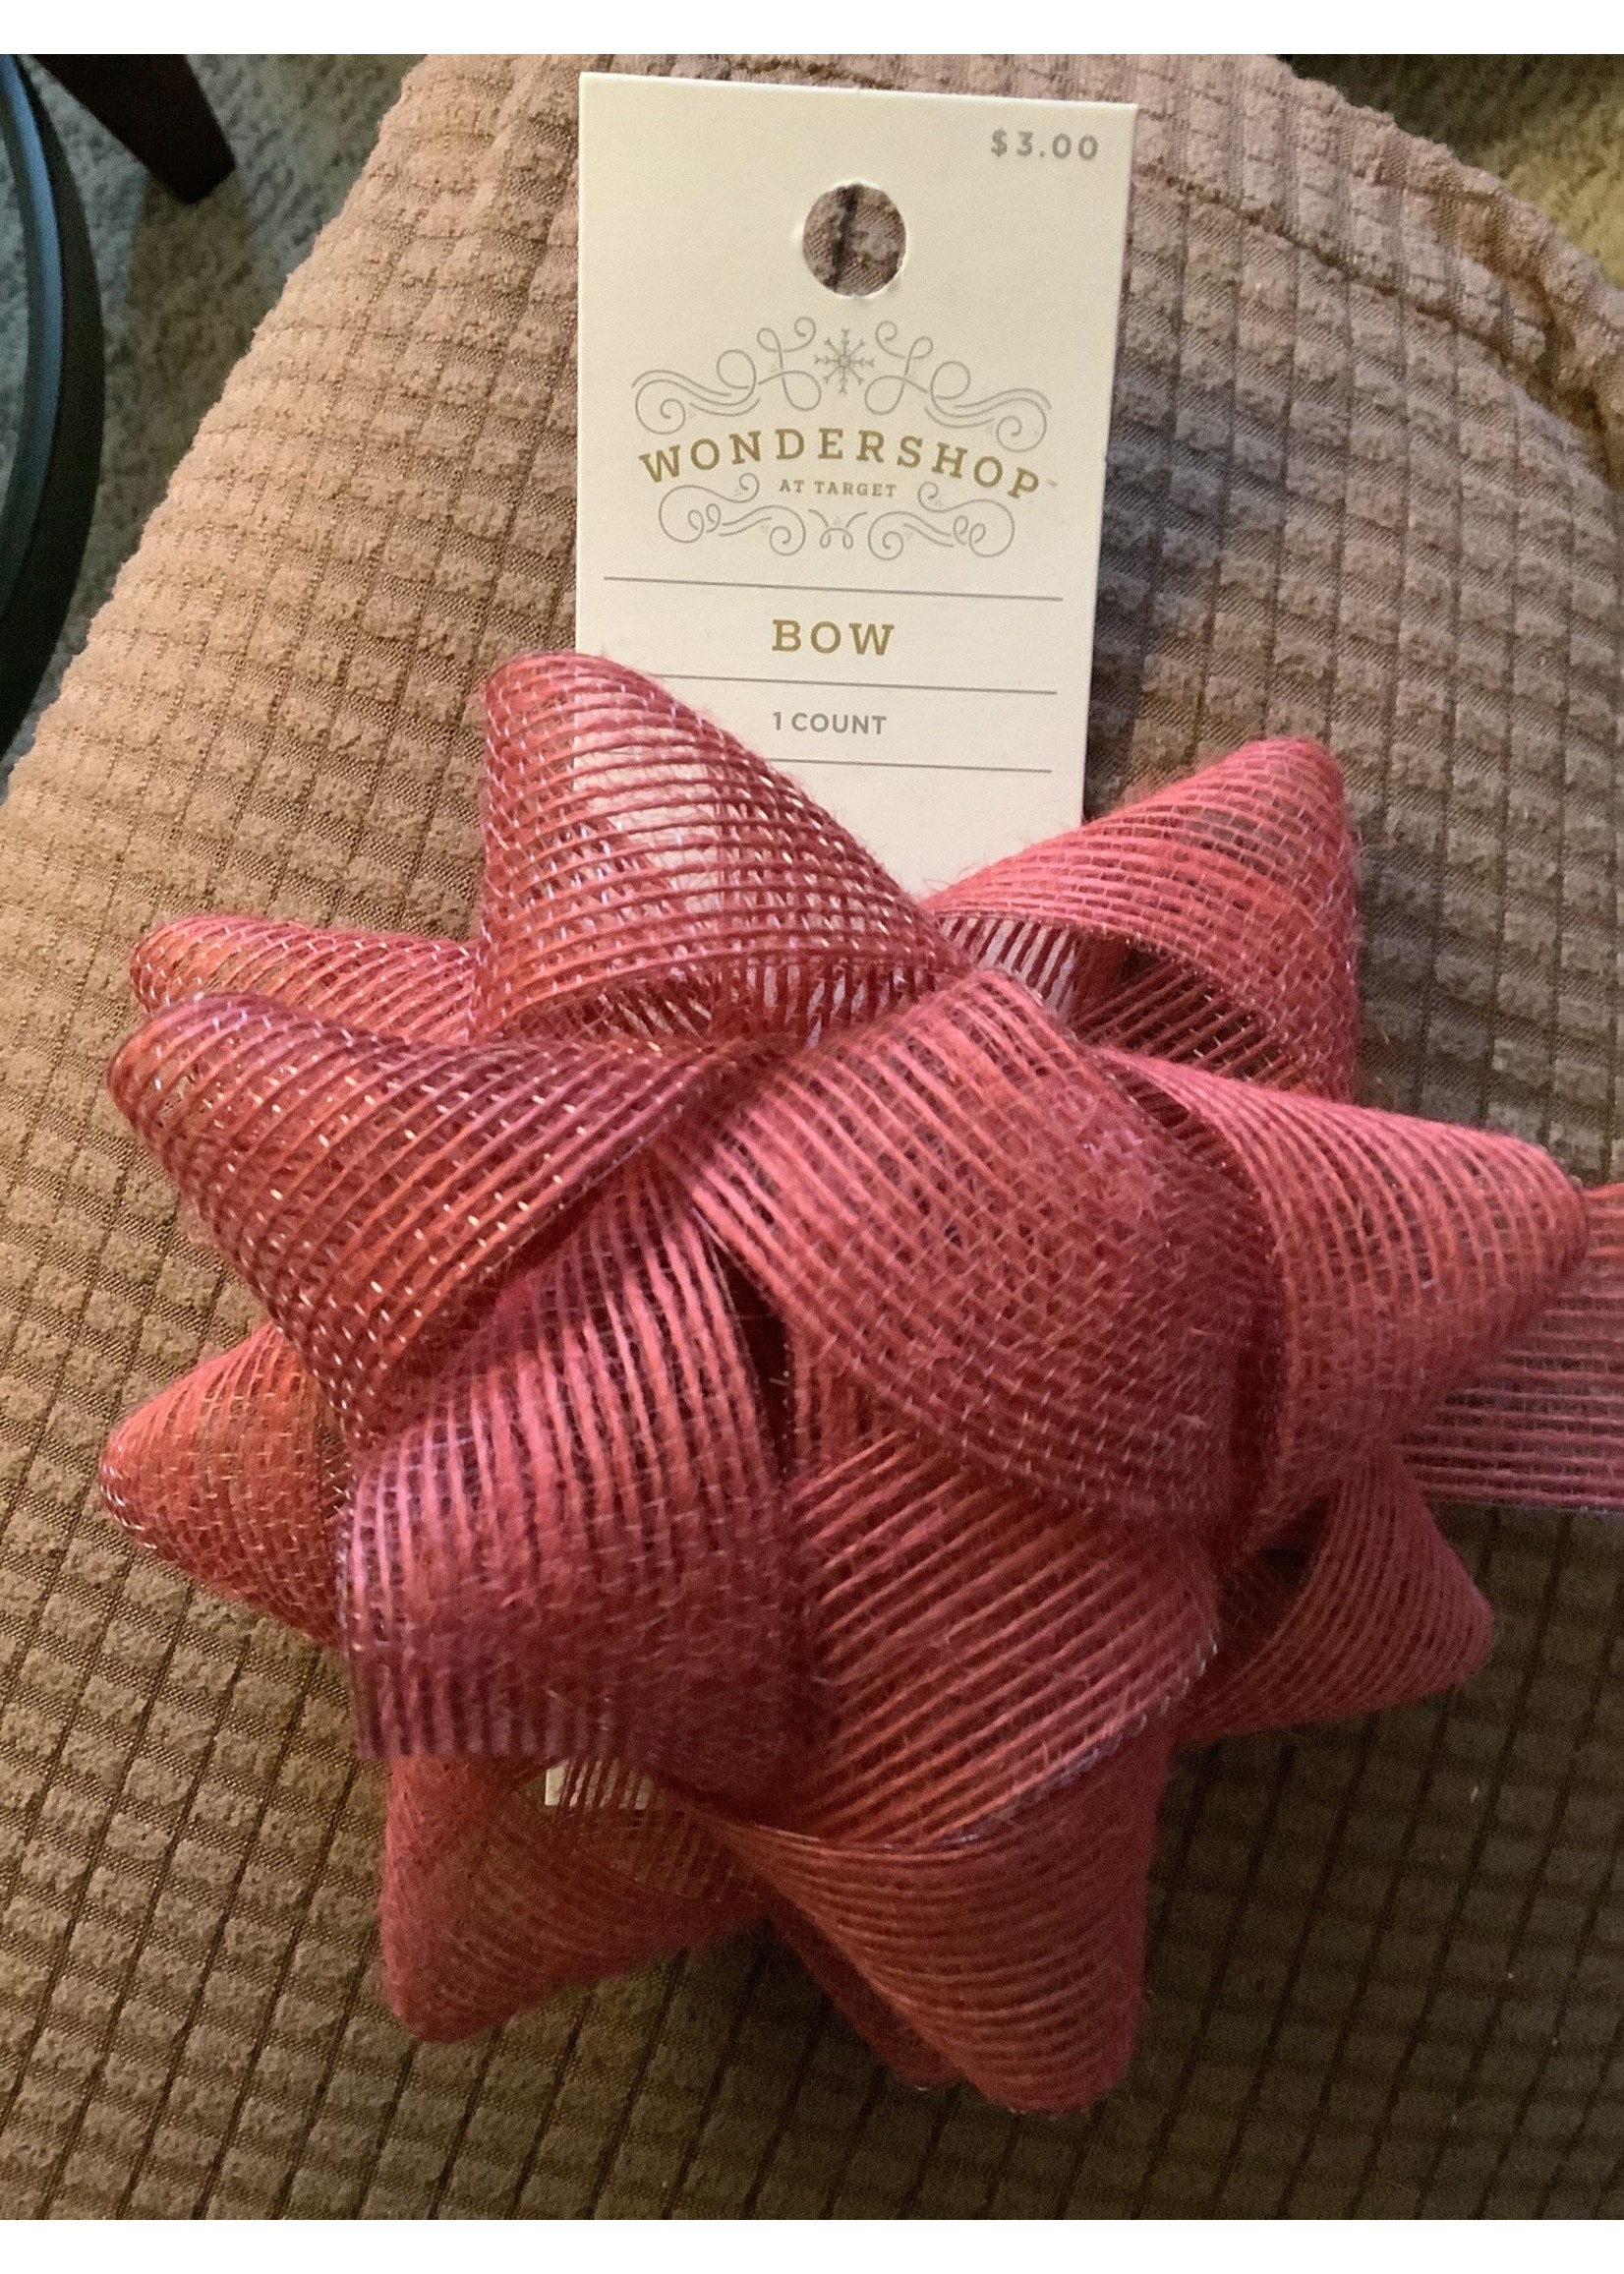 Red Christmas Bow